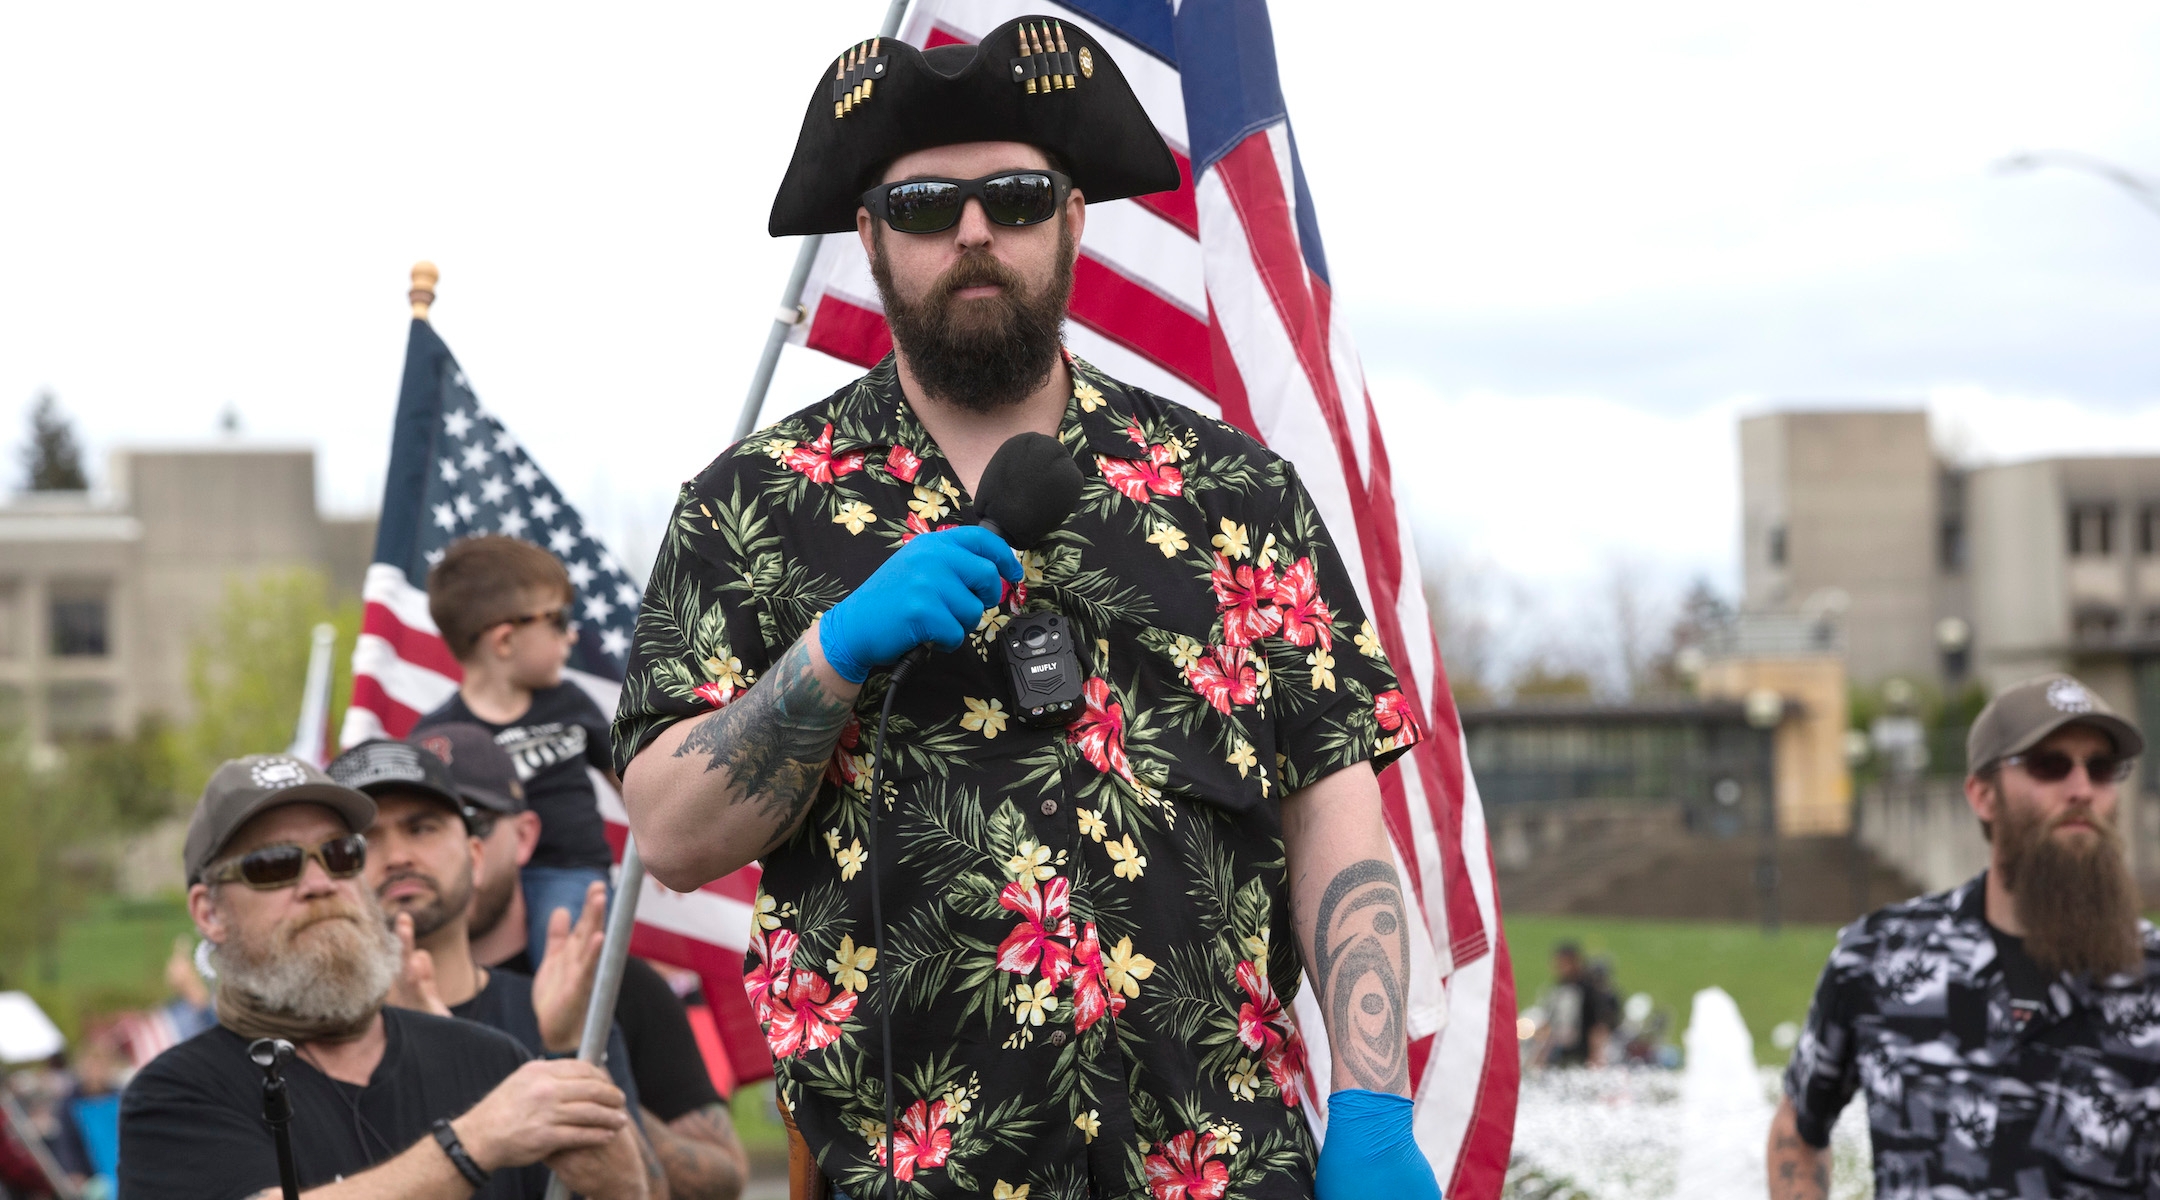 Meet The Boogaloo Bois The Violent Right Wing Extremists Who